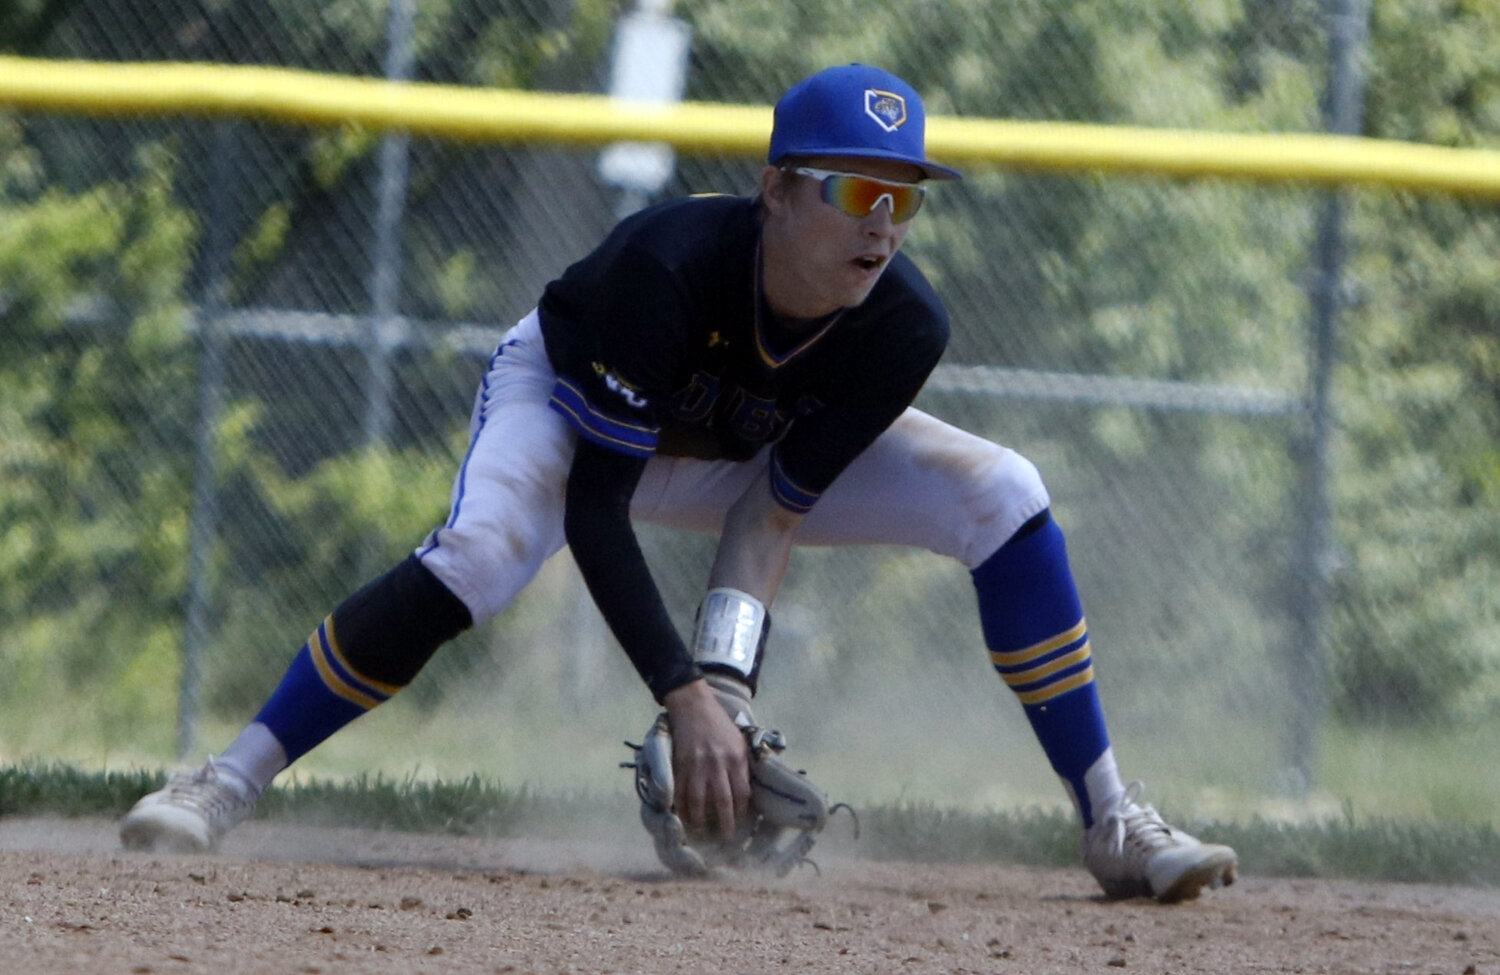 Shortstop Devin Foust corrals the ground ball during last week's game.